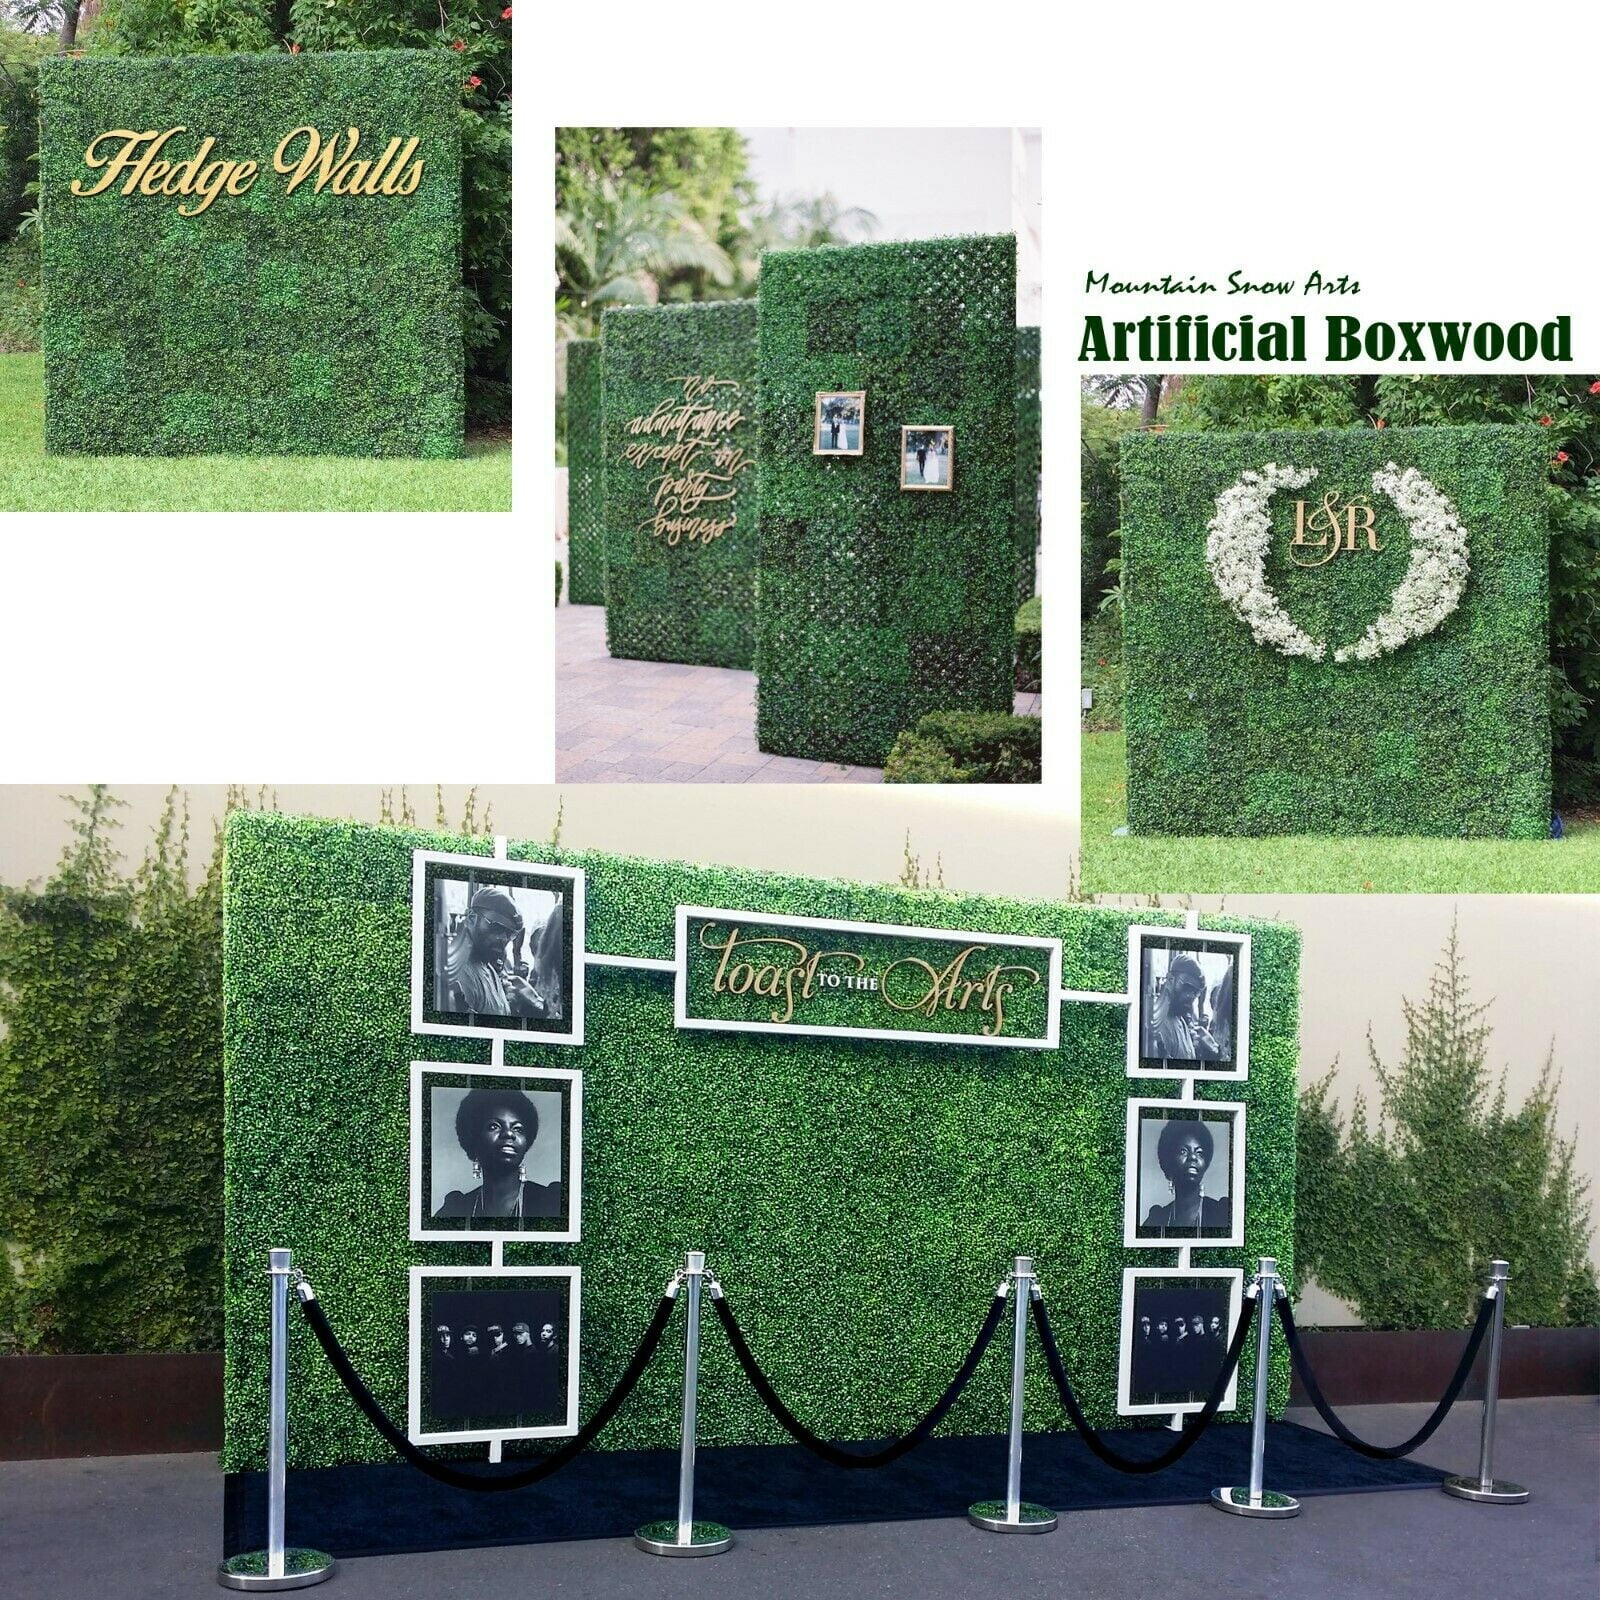 Details about   Artificial Boxwood Hedge Wall  Fence With Faux Leaves Boxwood Jasmine Gardenia 